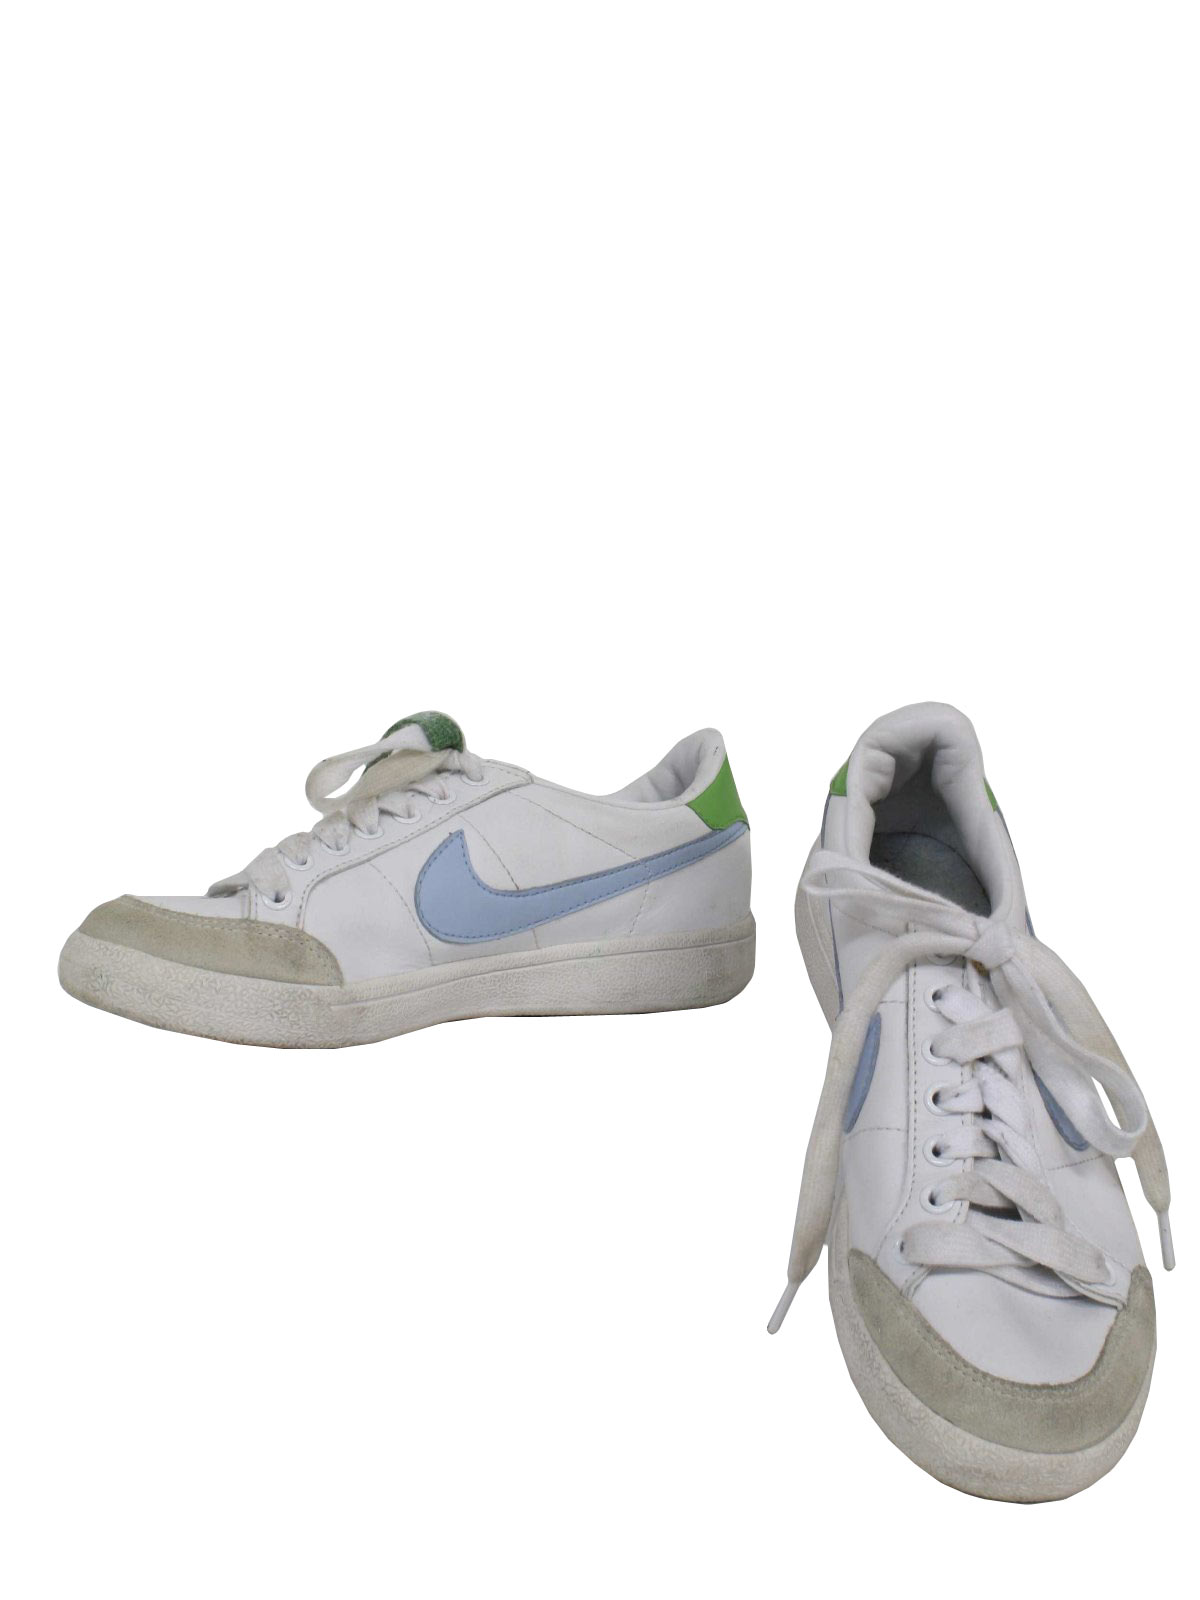 old nike shoes 90's